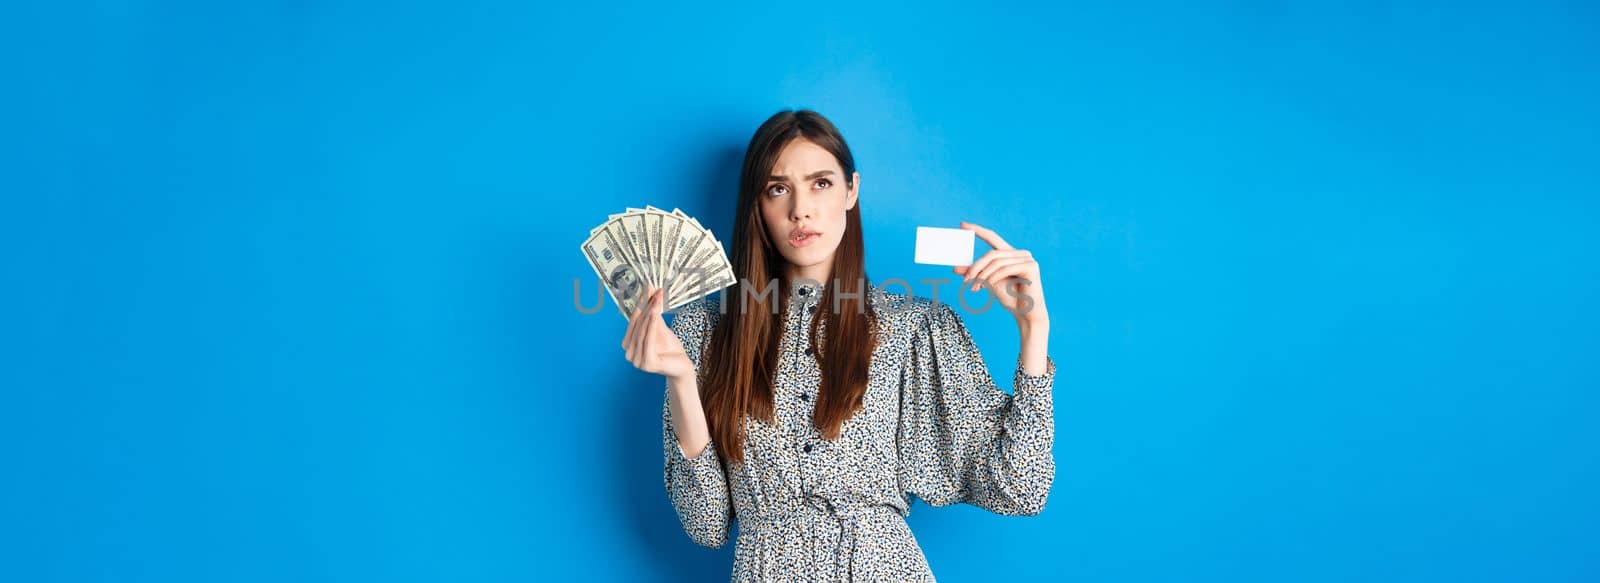 Shopping. Thoughtful girl looking up and biting lip, counting in mind or thinking, holding plastic credit card with dollar bills, standing on blue background.